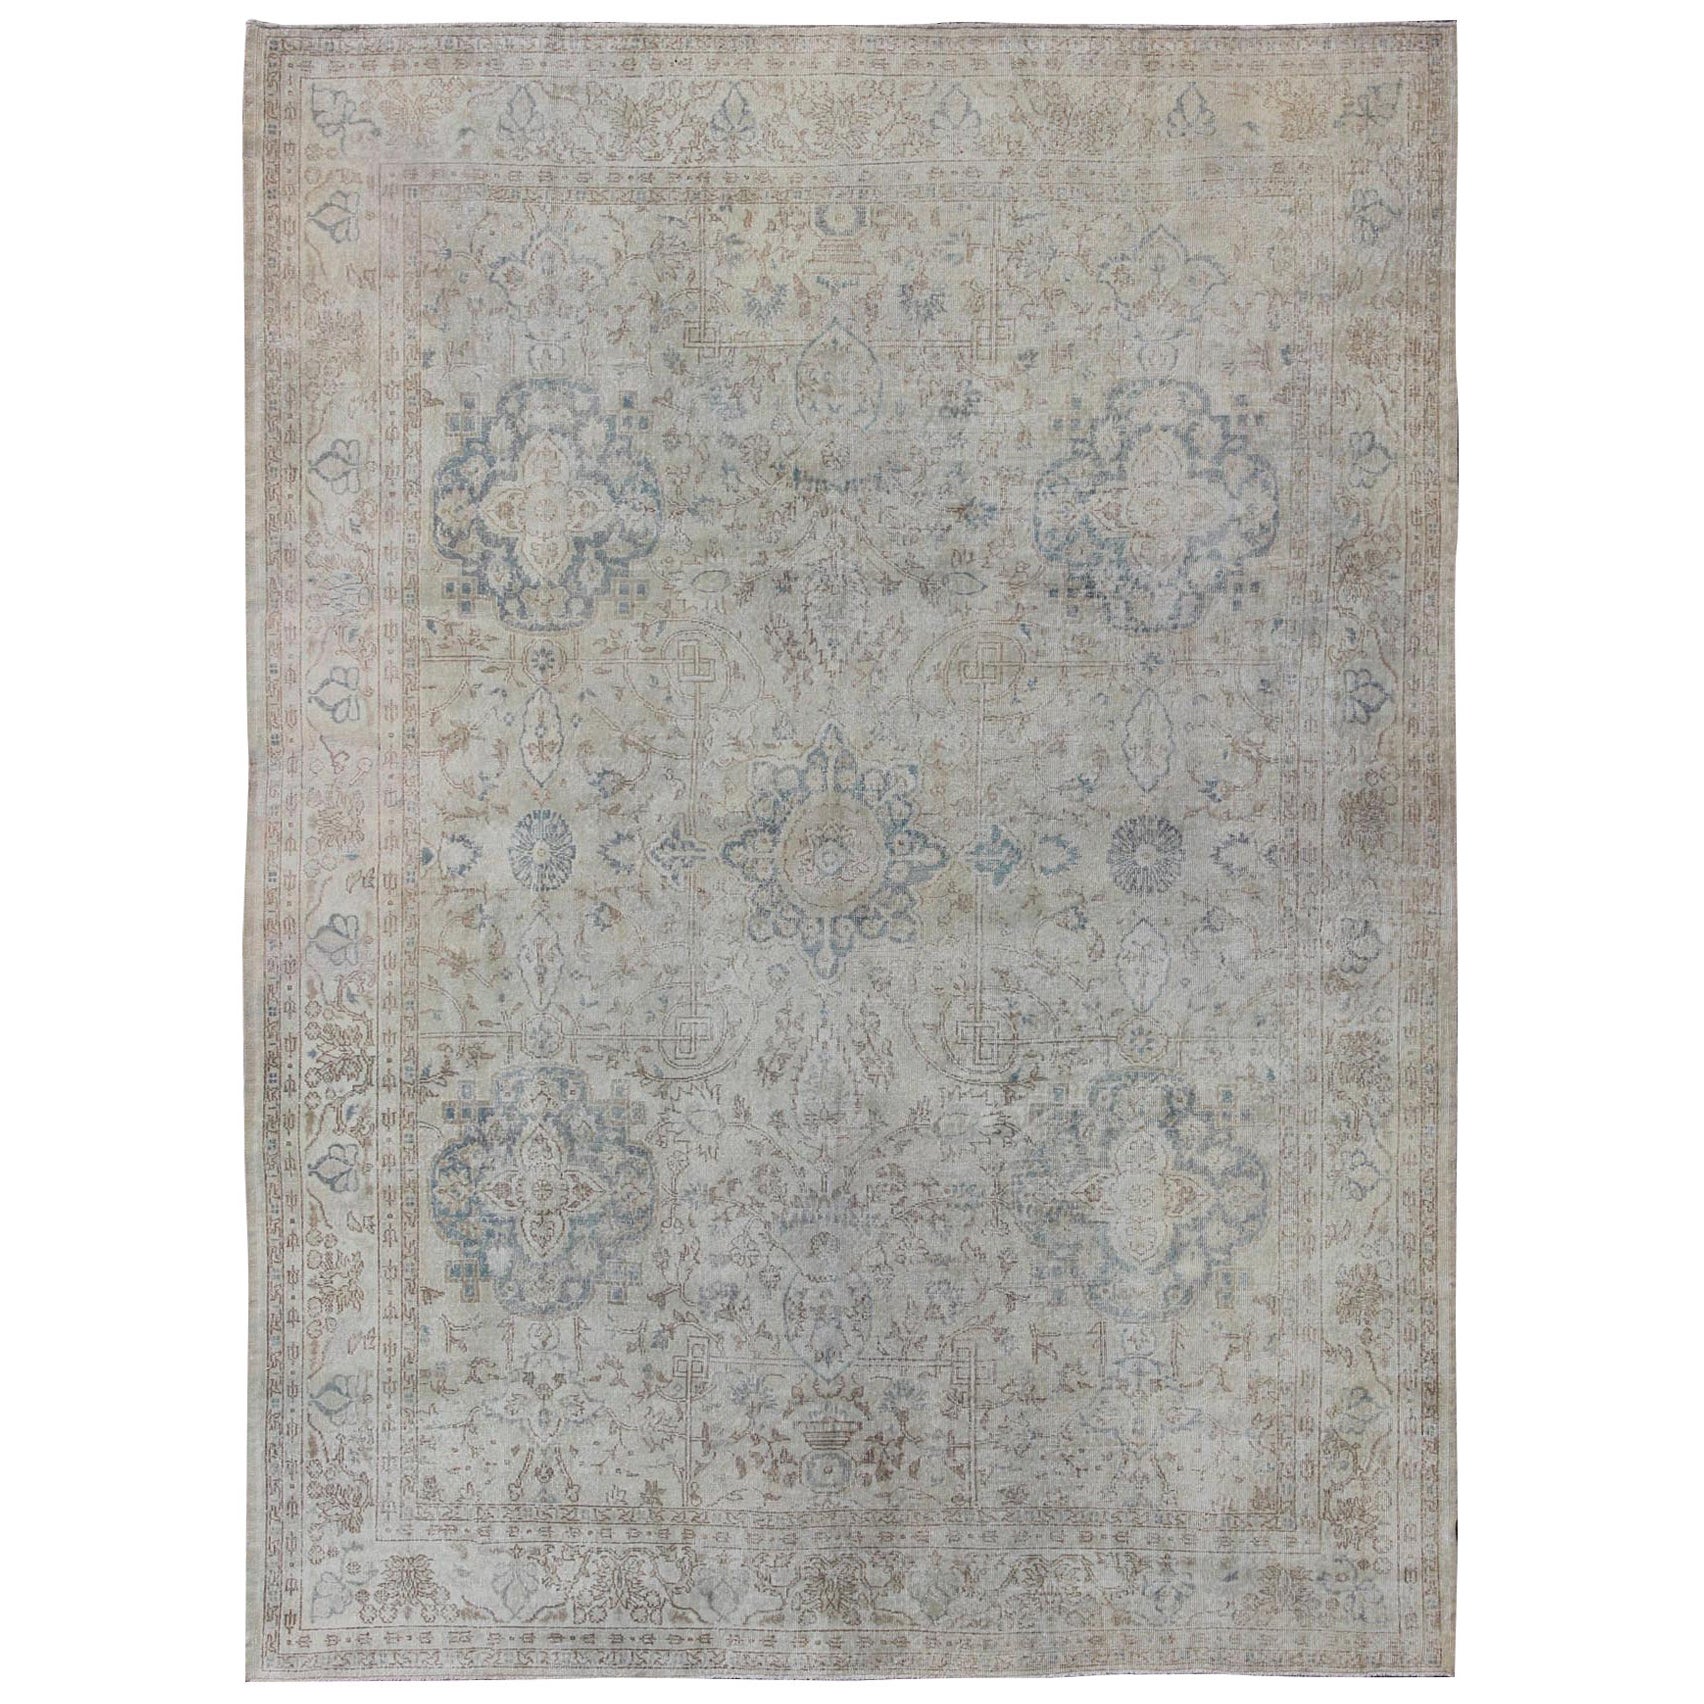 Antique Large Turkish Oushak Rug in Light Blue, Wheat, Camel and Gray